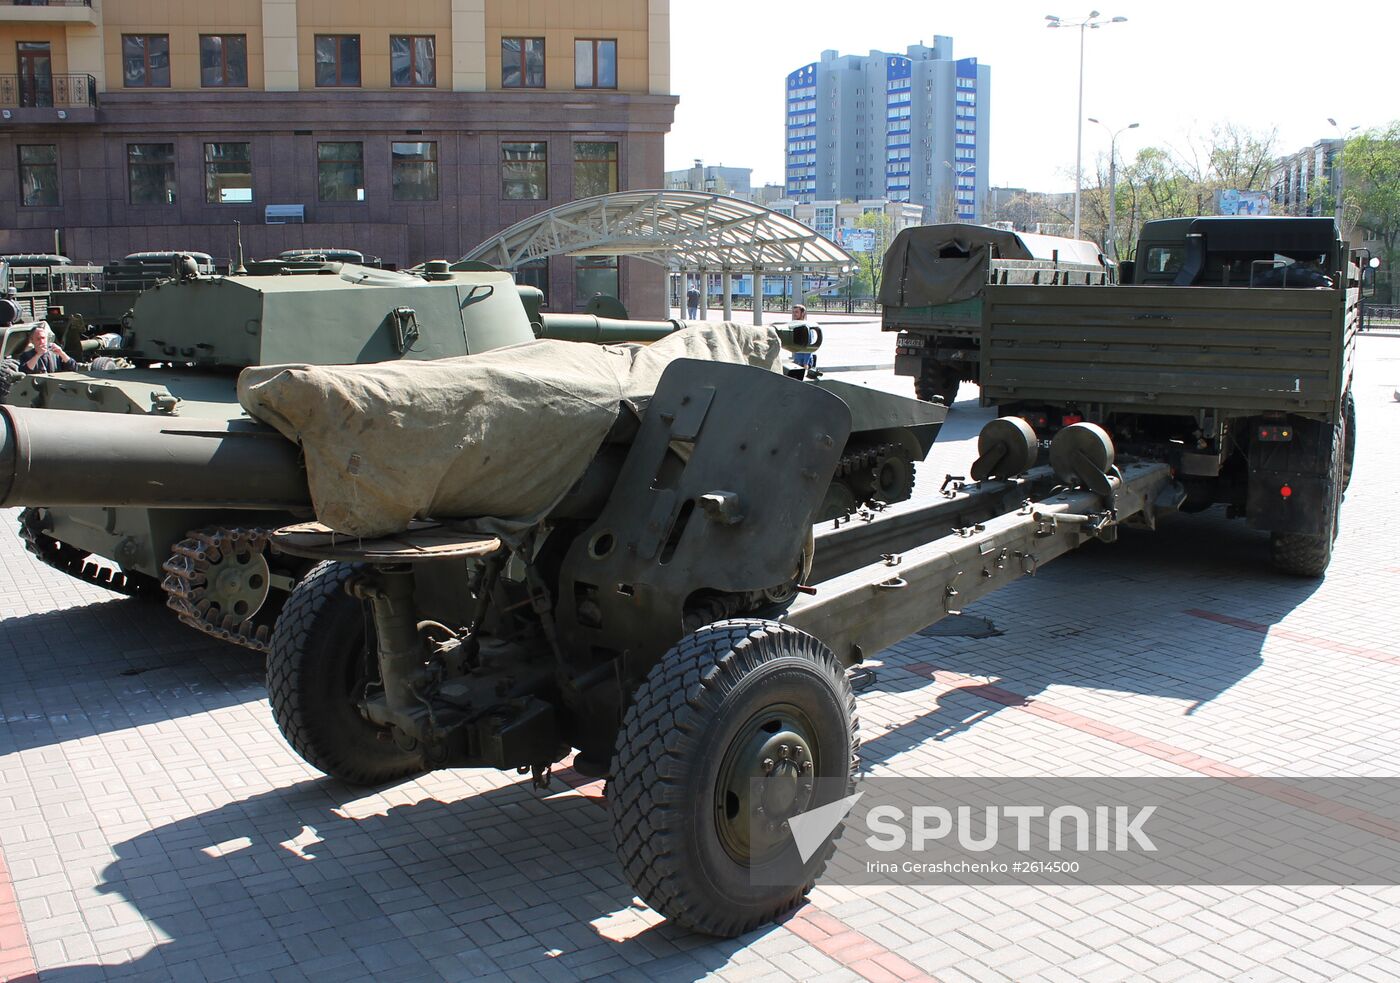 Preparations for Victory Parade in Donetsk